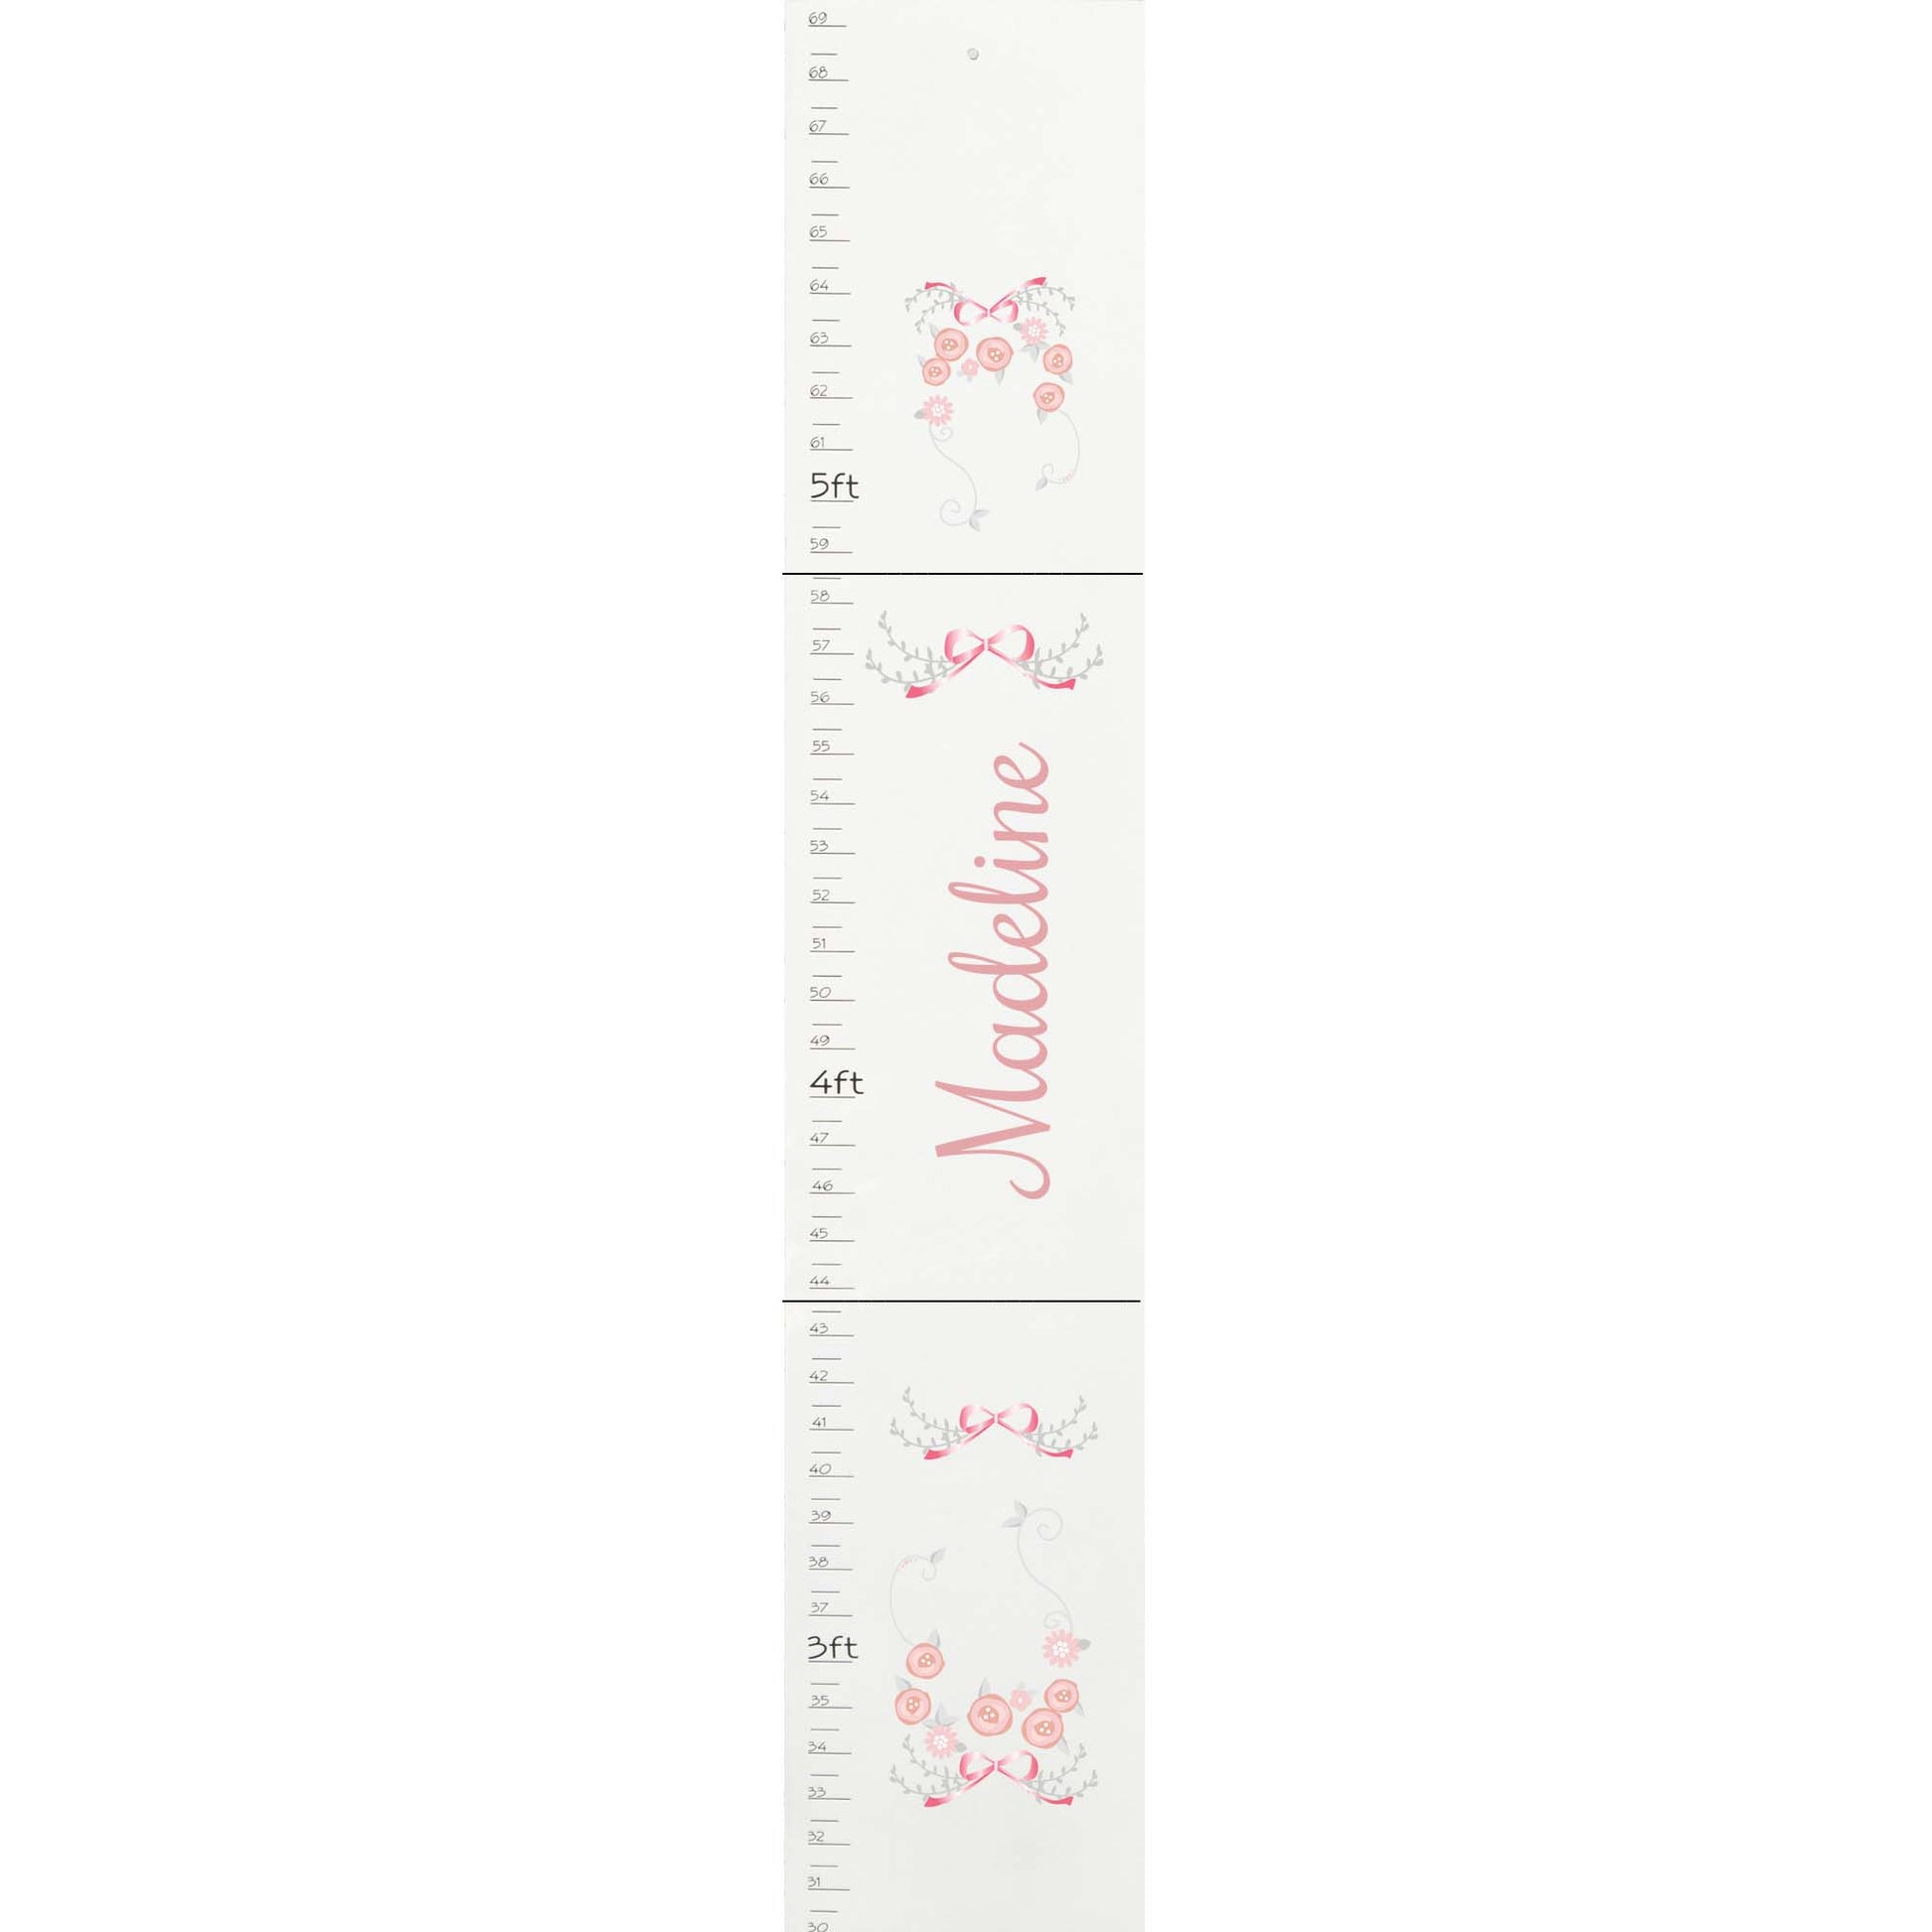 Personalized White Childrens Growth Chart with Cupcake design